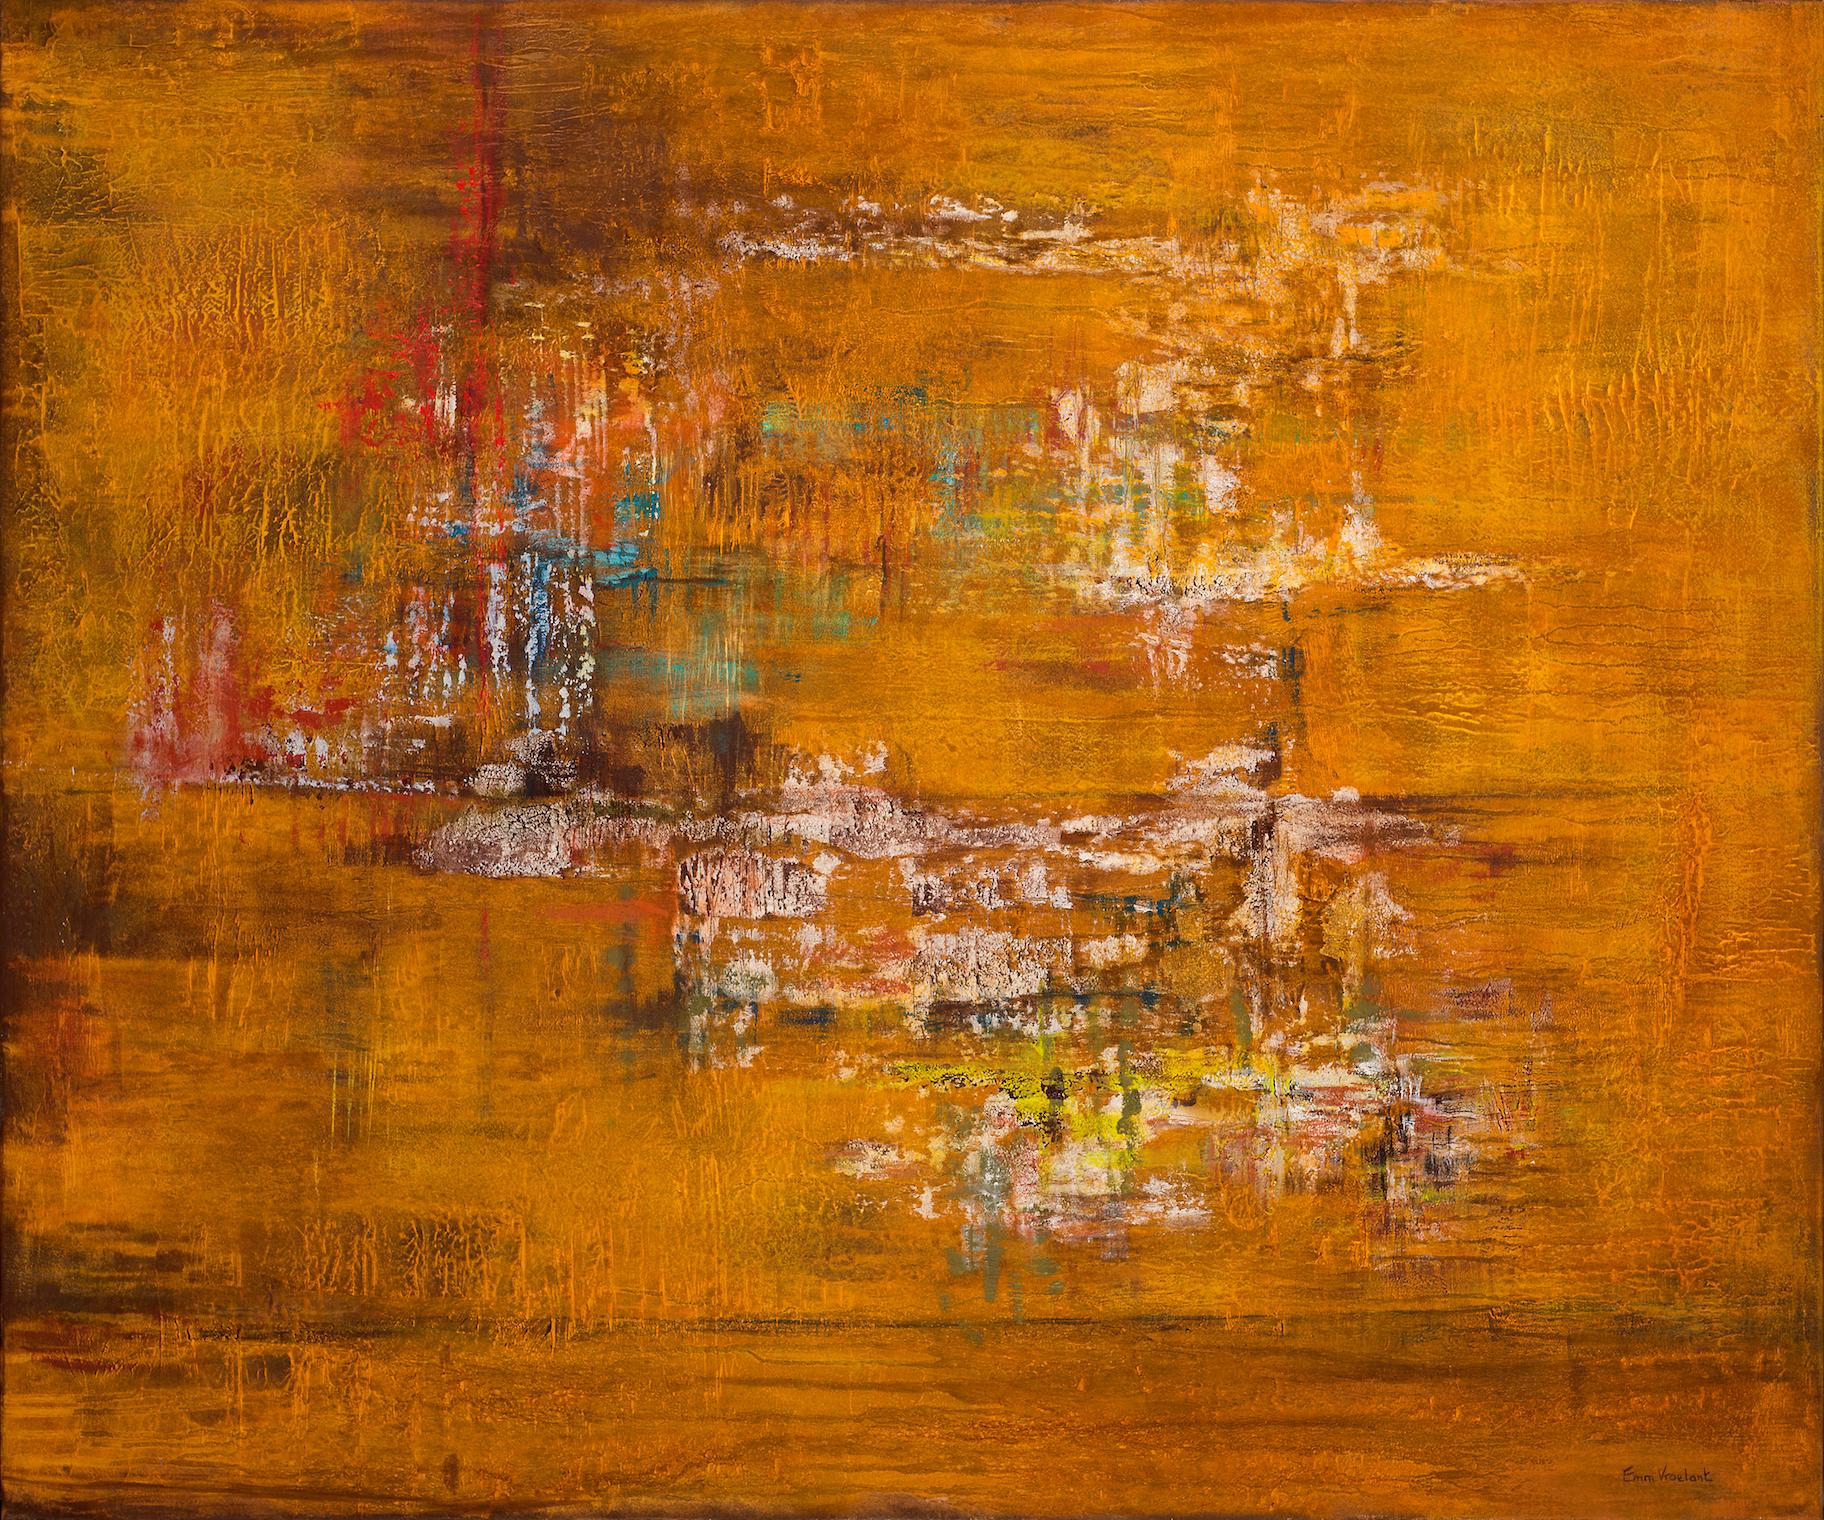 Emmanuelle Vroelant Interior Painting - "Traces" abstract  oxidation on linen canvas 100x120cm send in wood crate 2015